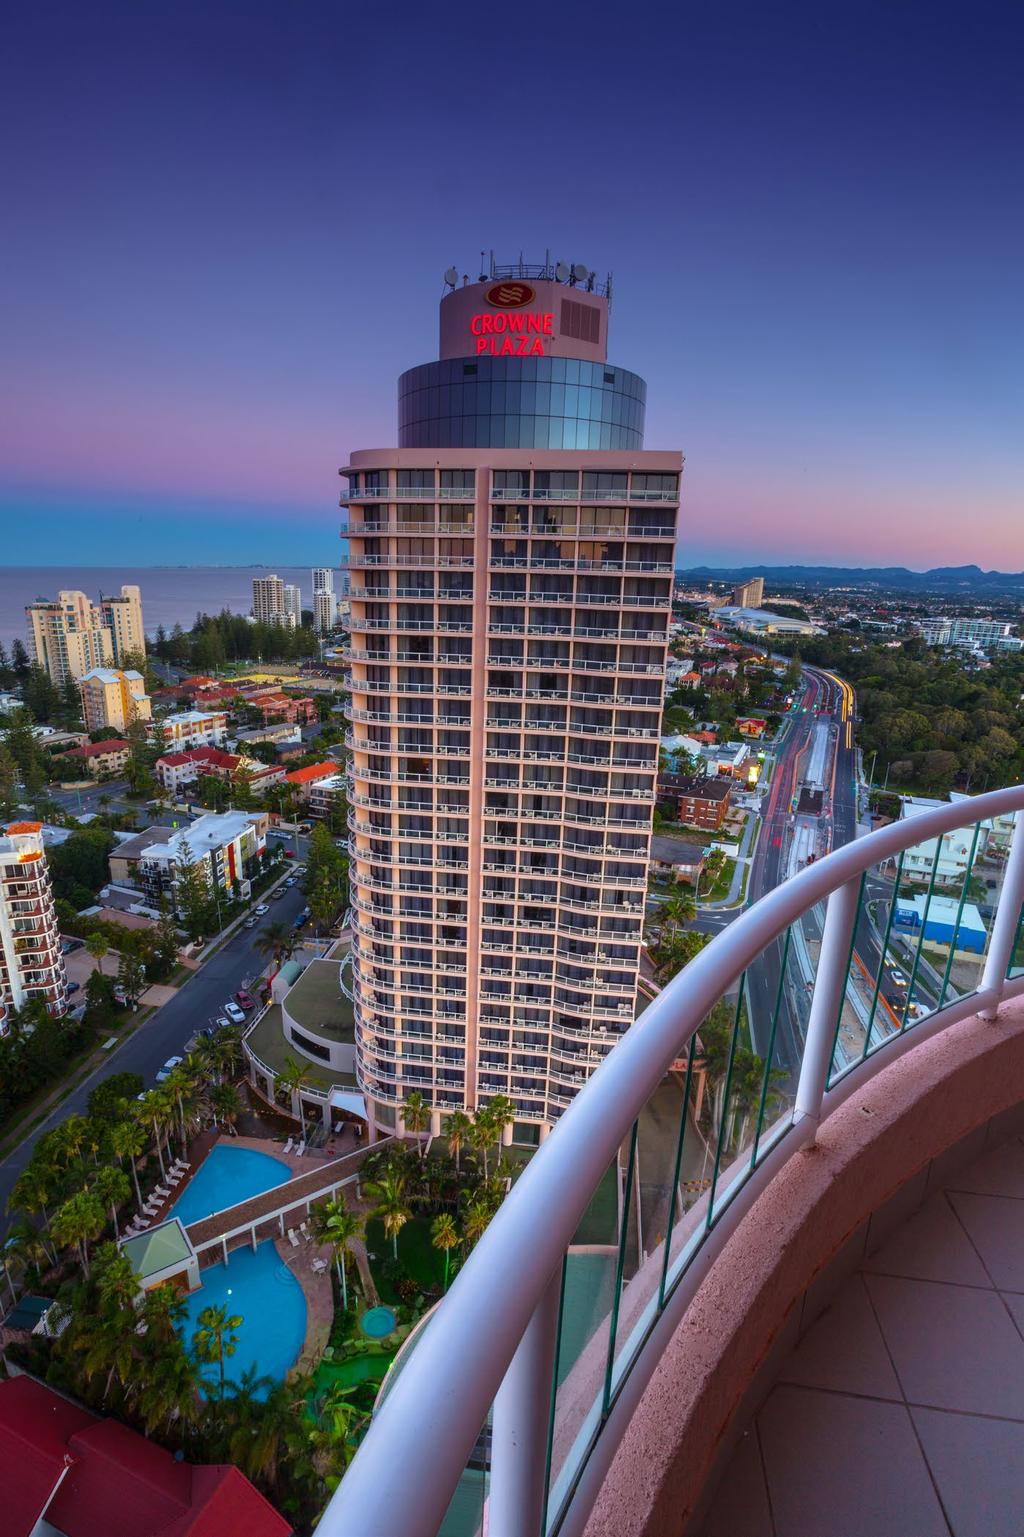 WELCOME TO CROWNE PLAZA SURFERS PARADISE.